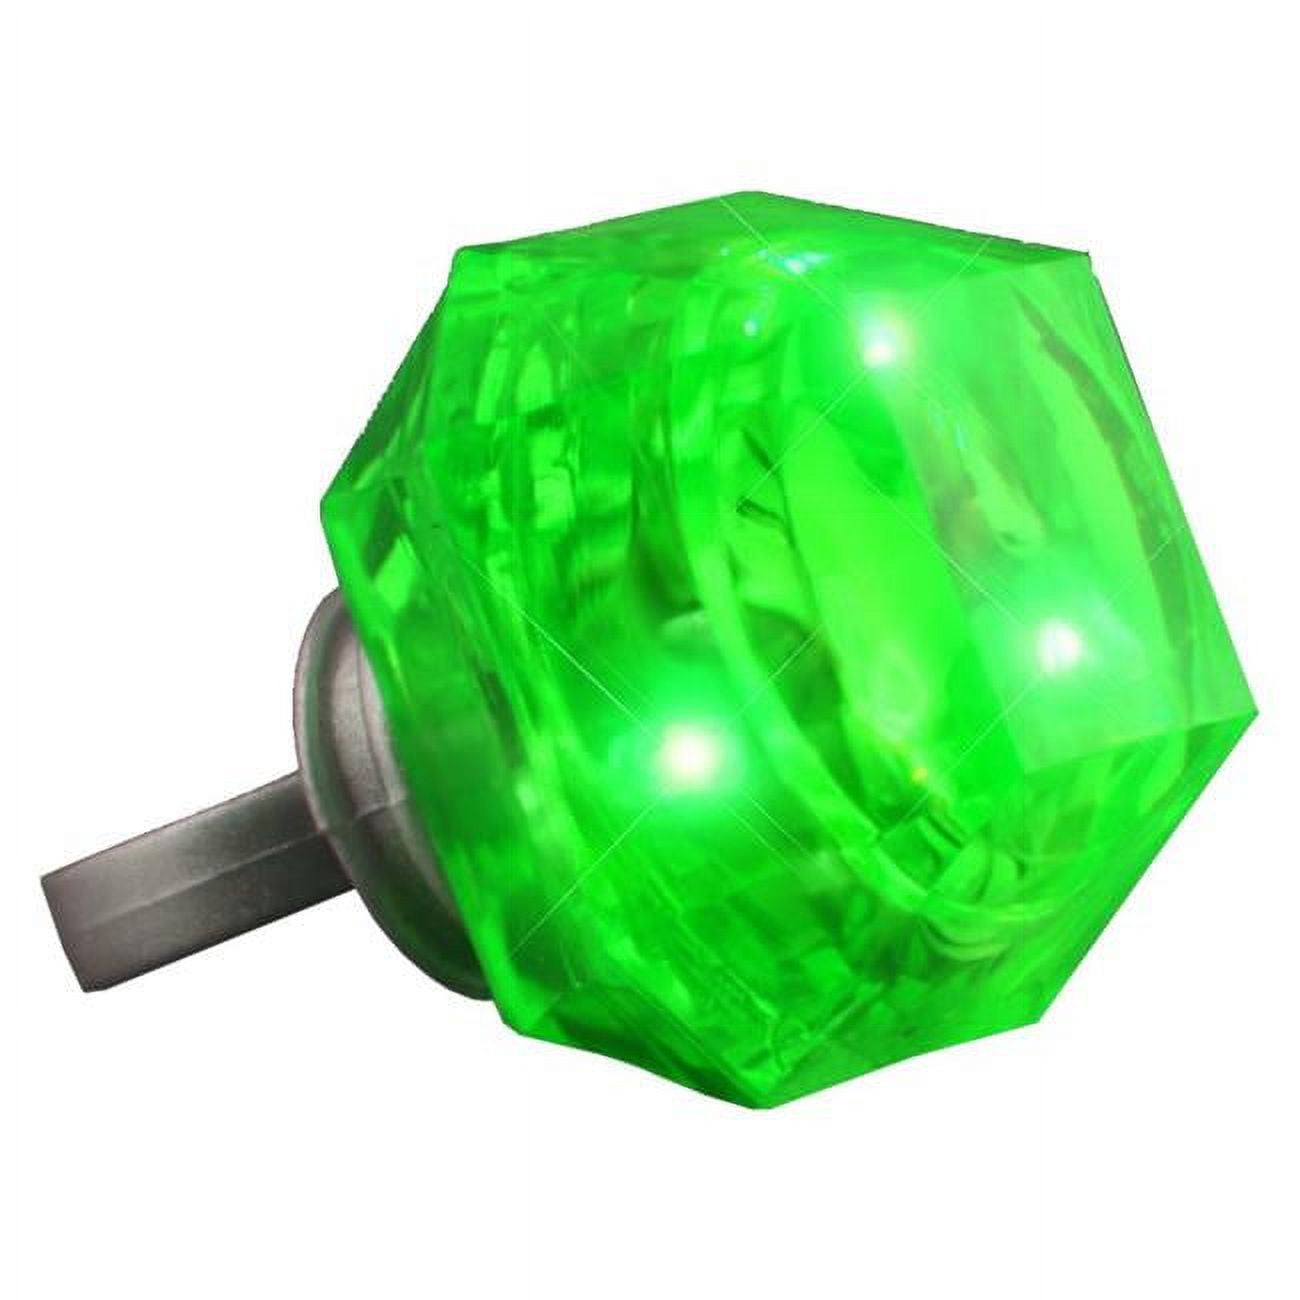 Picture of Blinkee LGEMRG Large Emerald Green Fashionable LED Gem Ring for Parties